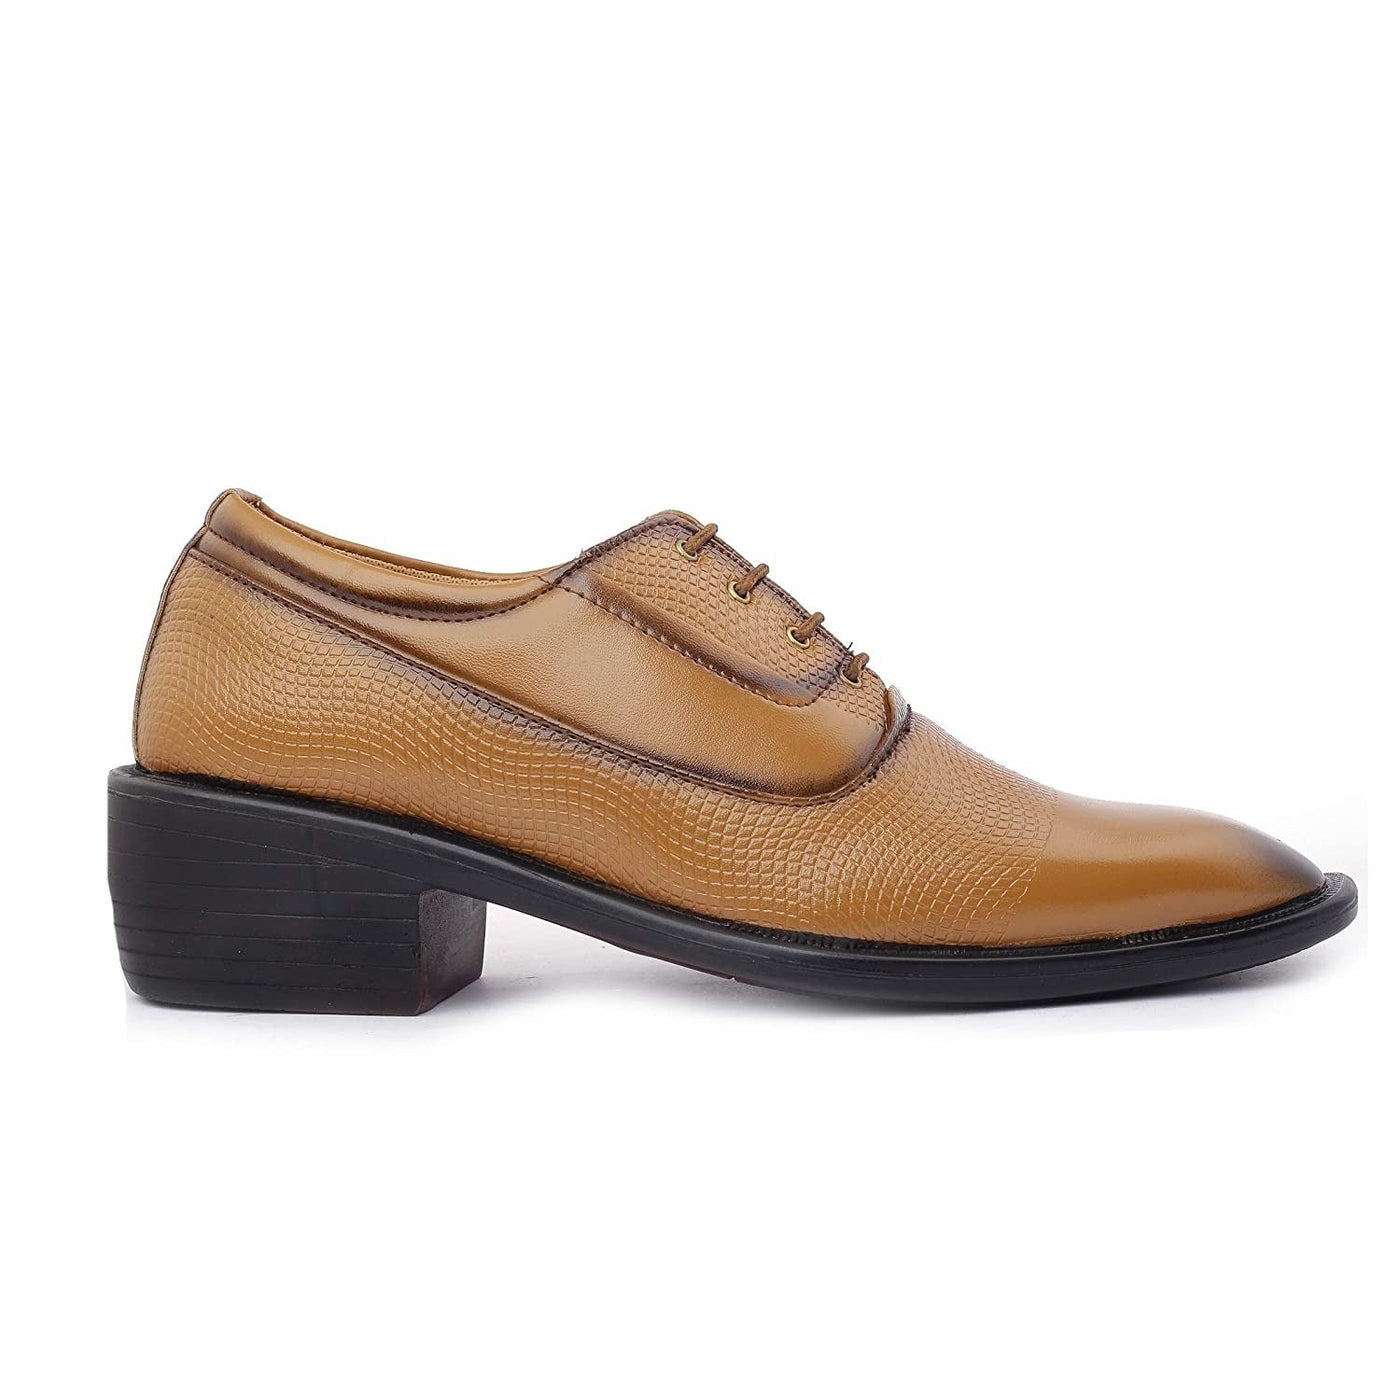 Classy Casual And Formal Business Wear Tan Lace-Up Shoes-Unique and Classy